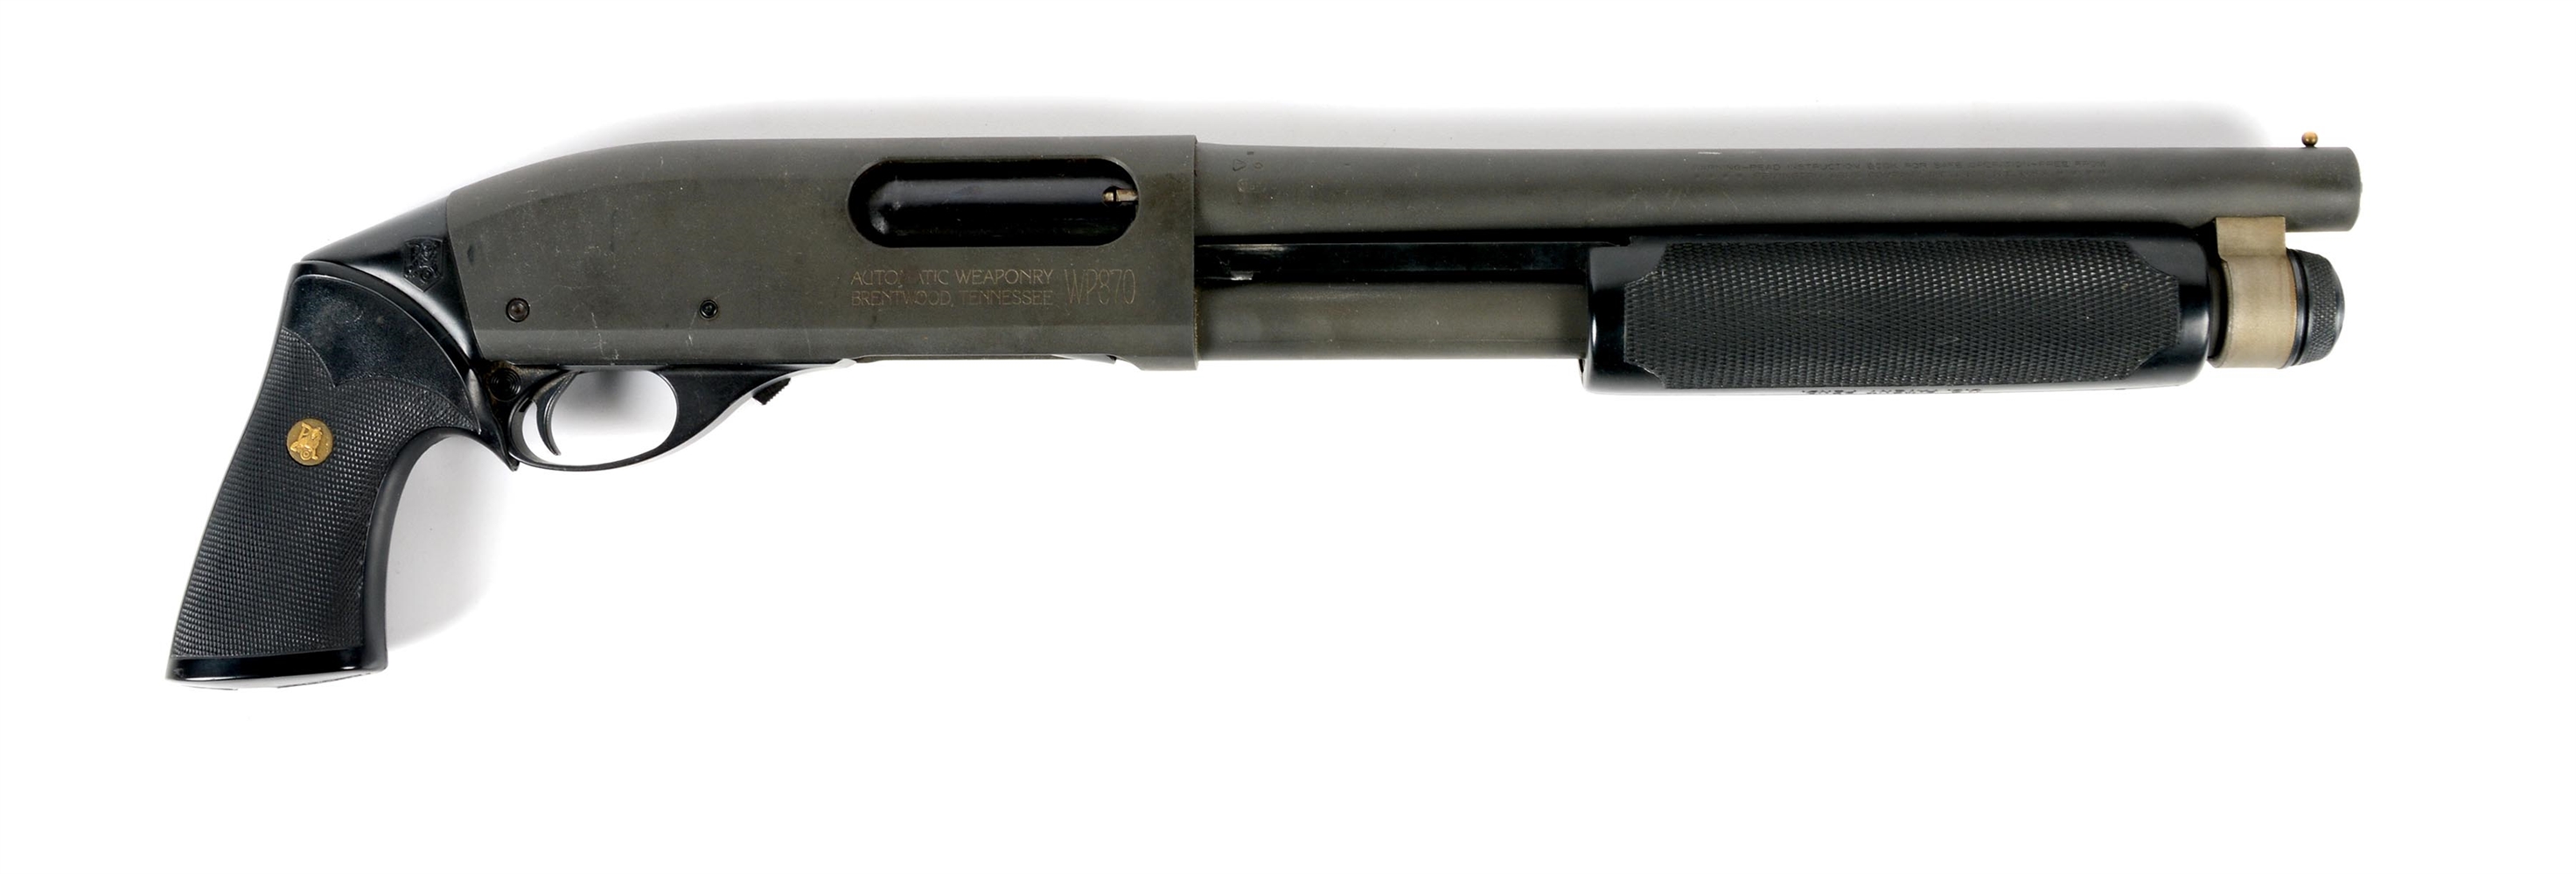 (N) AUTOMATIC WEAPONRY WP-870 PUMP ACTION SHOTGUN (ANY OTHER WEAPON).